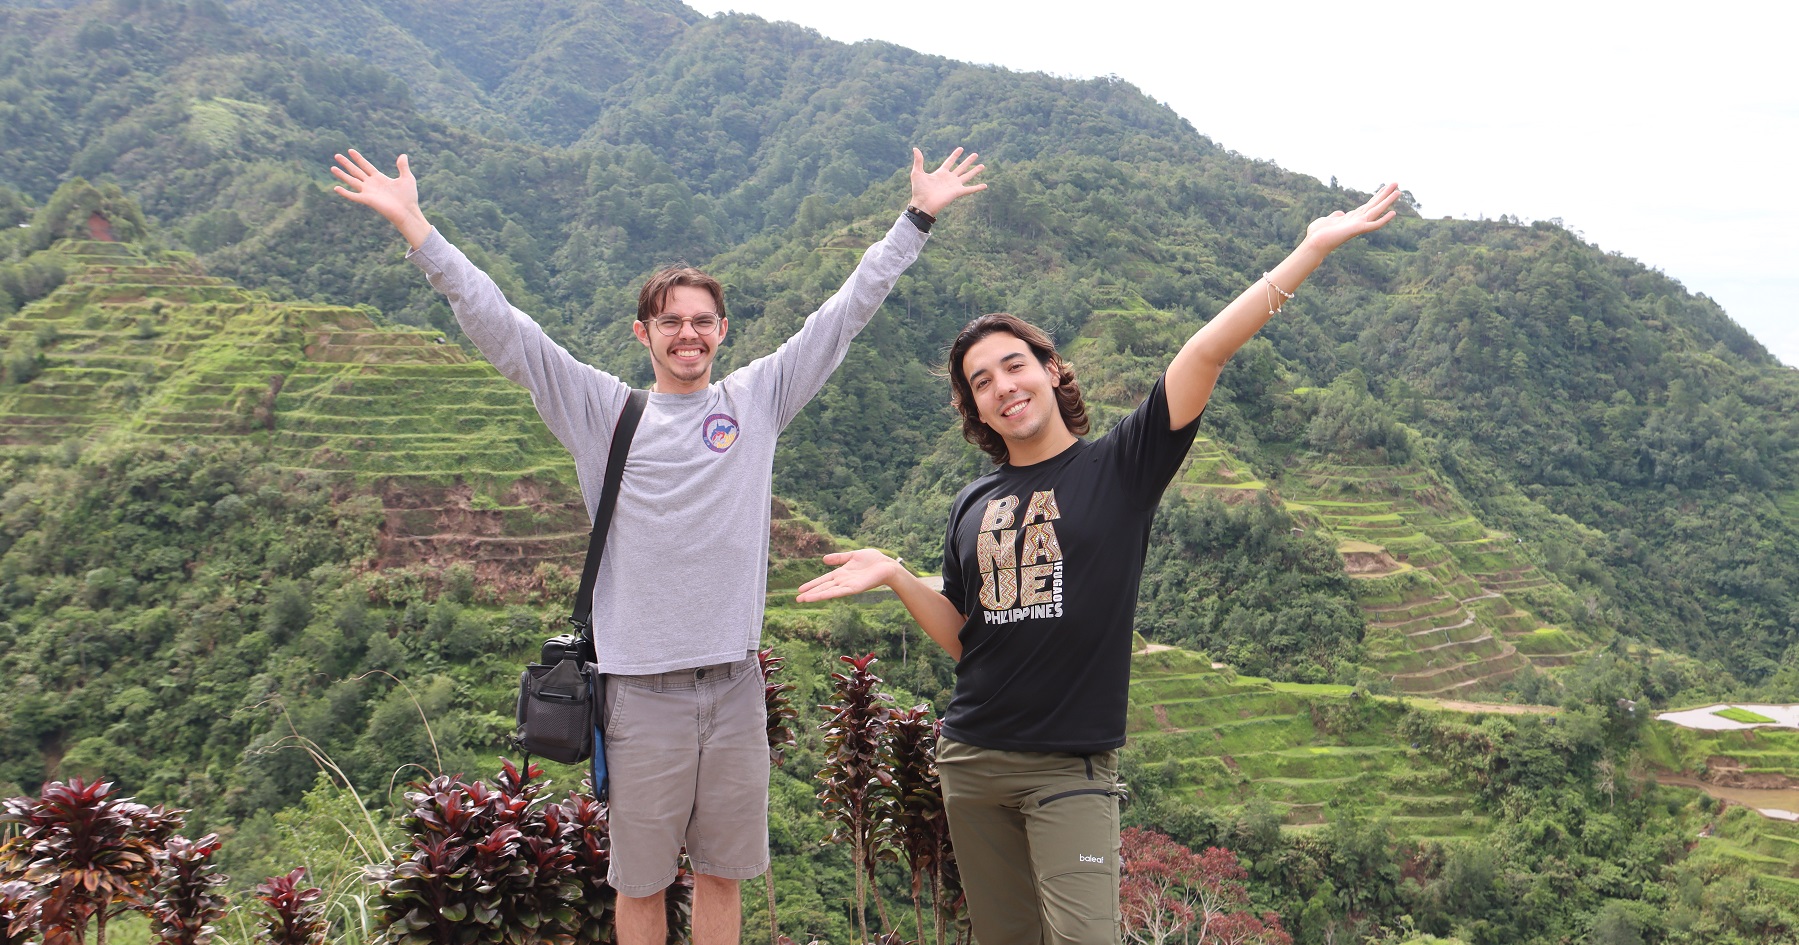 Student Matthew Haan stands with another person in front of mountains in the Philippines